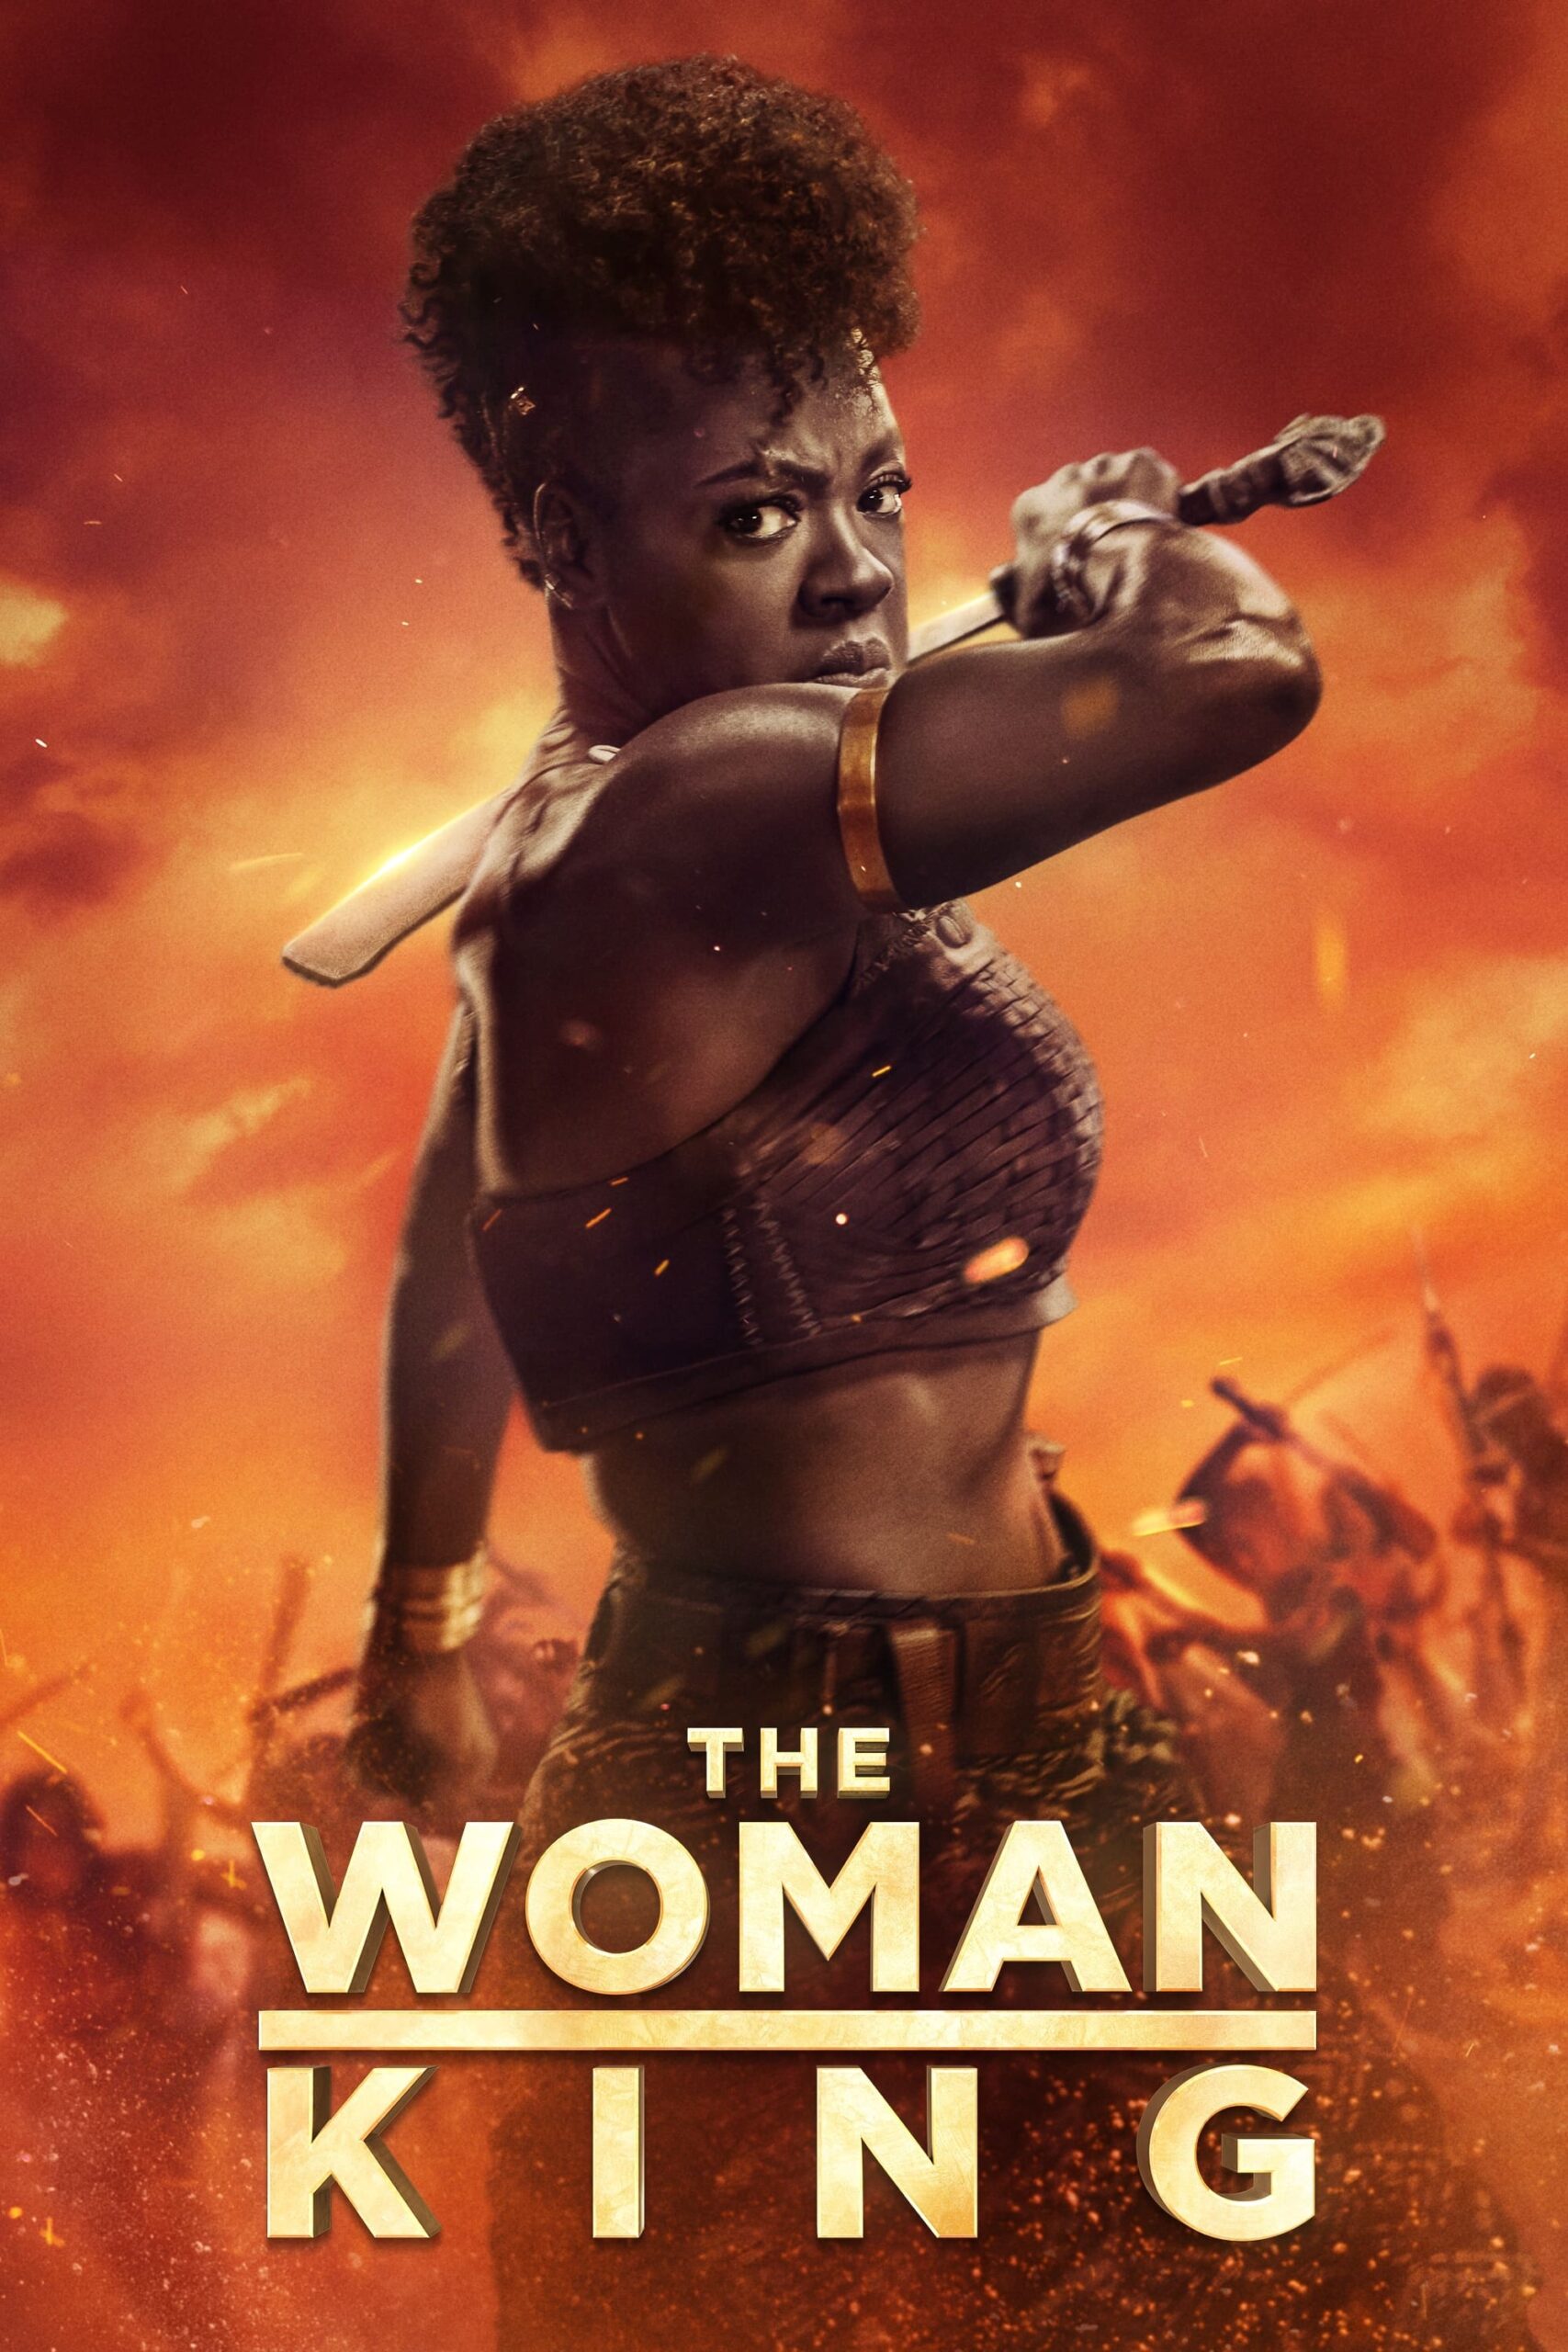 Poster for the movie "The Woman King"